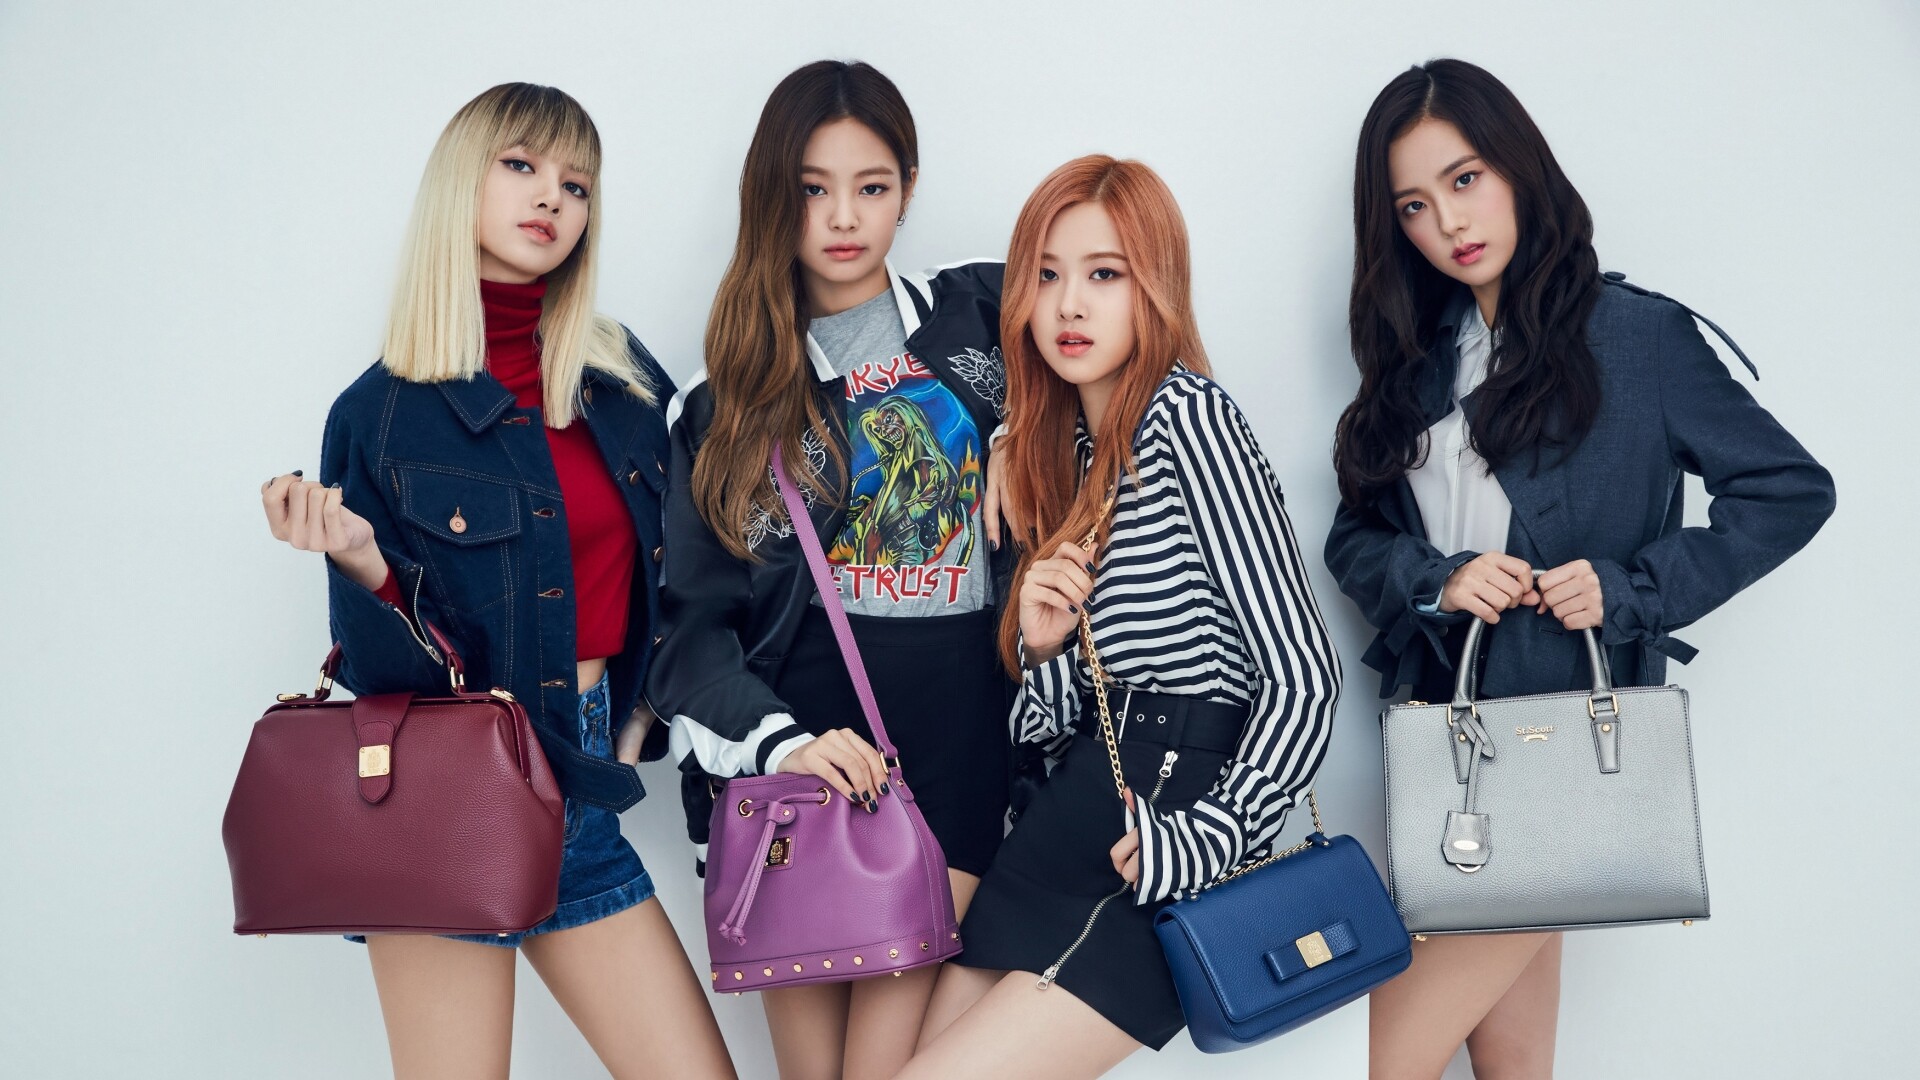 BLACKPINK: K-Pop, The group released their first Korean-language EP, Square Up, on June 15, 2018. 1920x1080 Full HD Background.